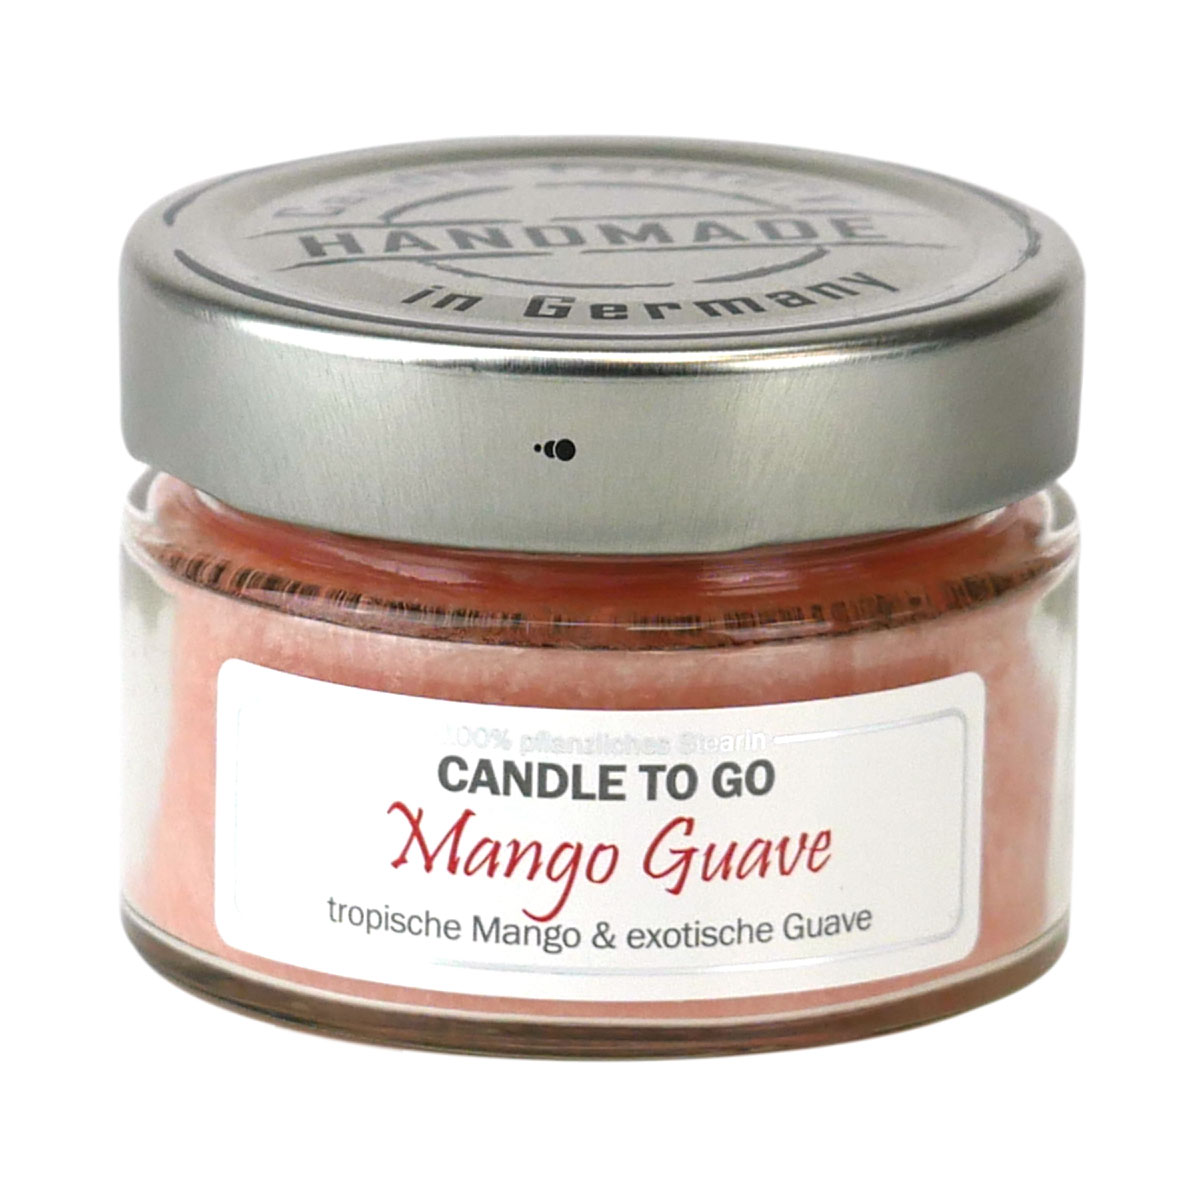 Mango Guave - Candle to Go Duftkerze von Candle Factory